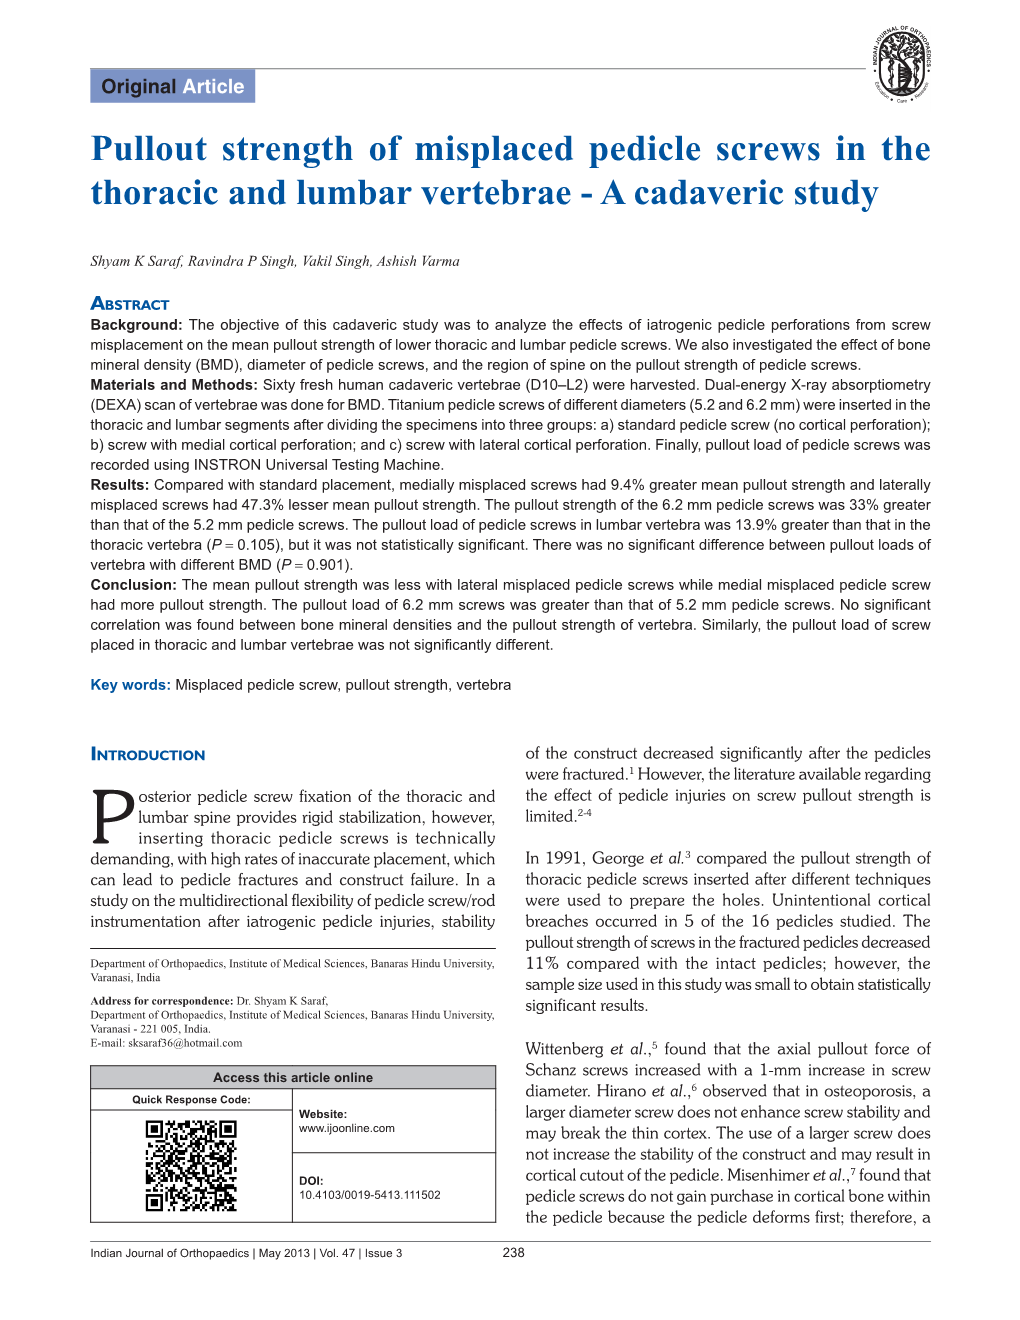 Pullout Strength of Misplaced Pedicle Screws in the Thoracic and Lumbar Vertebrae - a Cadaveric Study